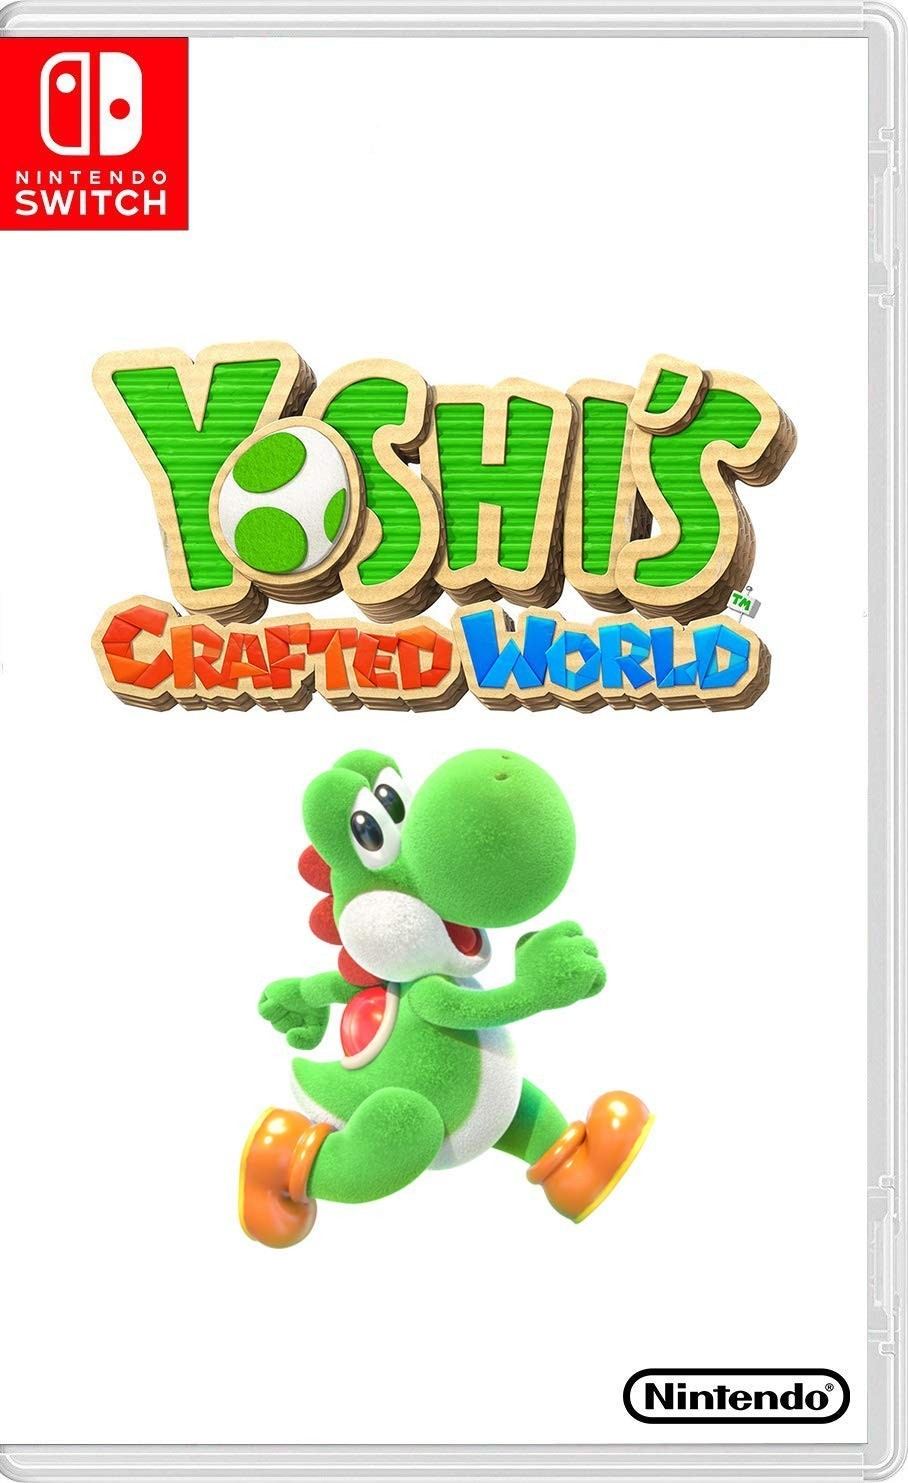 Yoshi\'s Crafted Switch World Subs) for Nintendo (Chinese